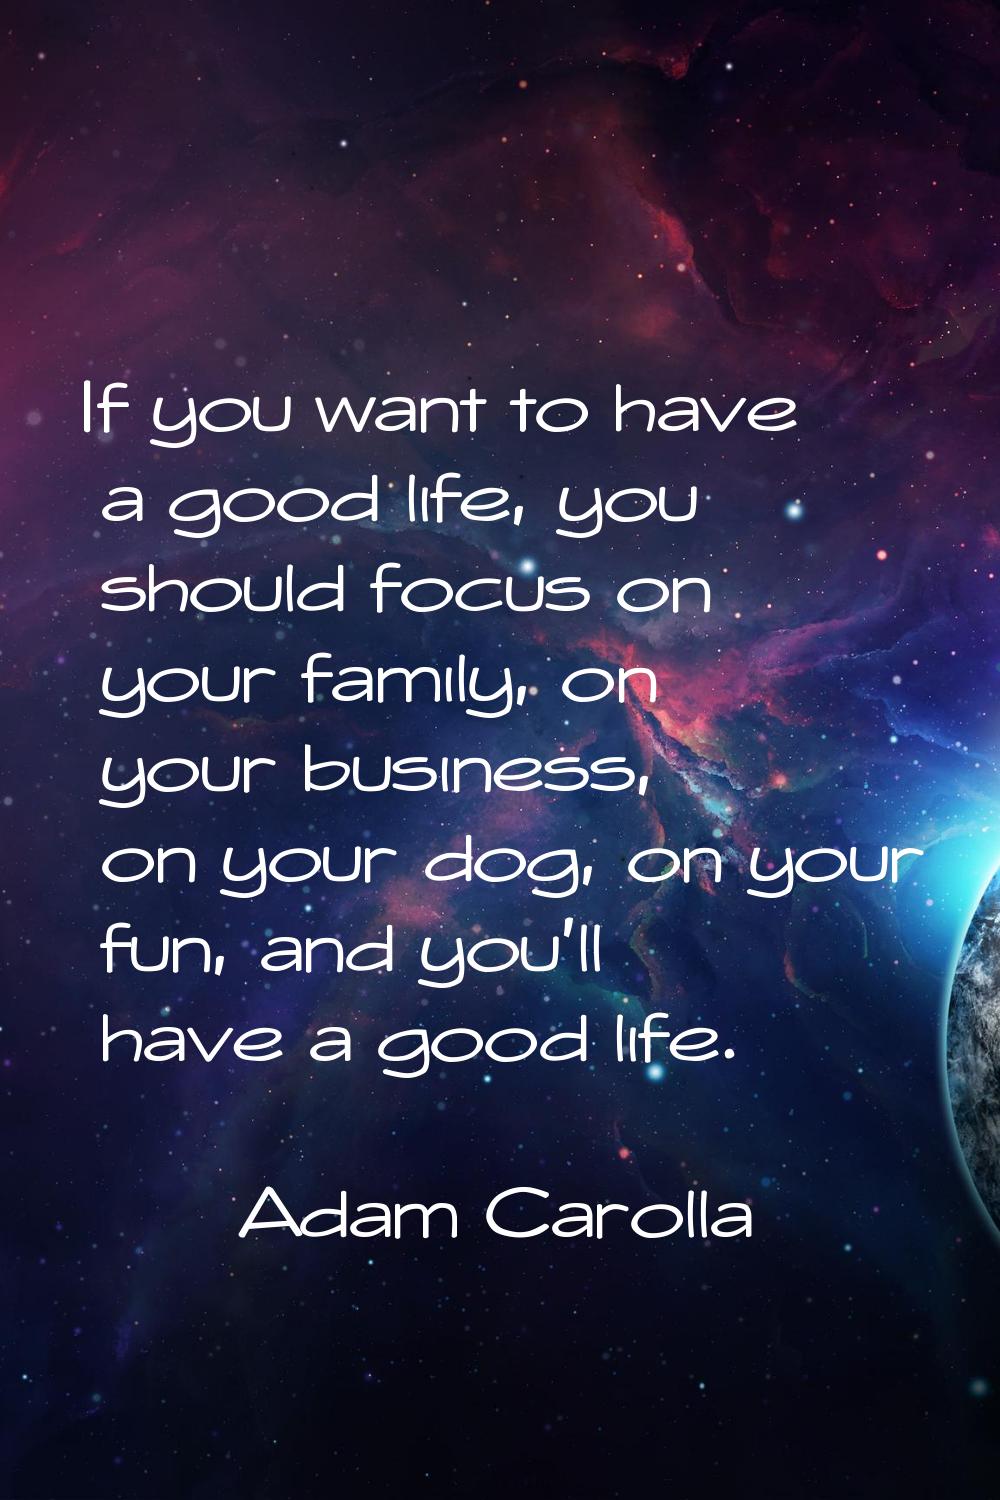 If you want to have a good life, you should focus on your family, on your business, on your dog, on